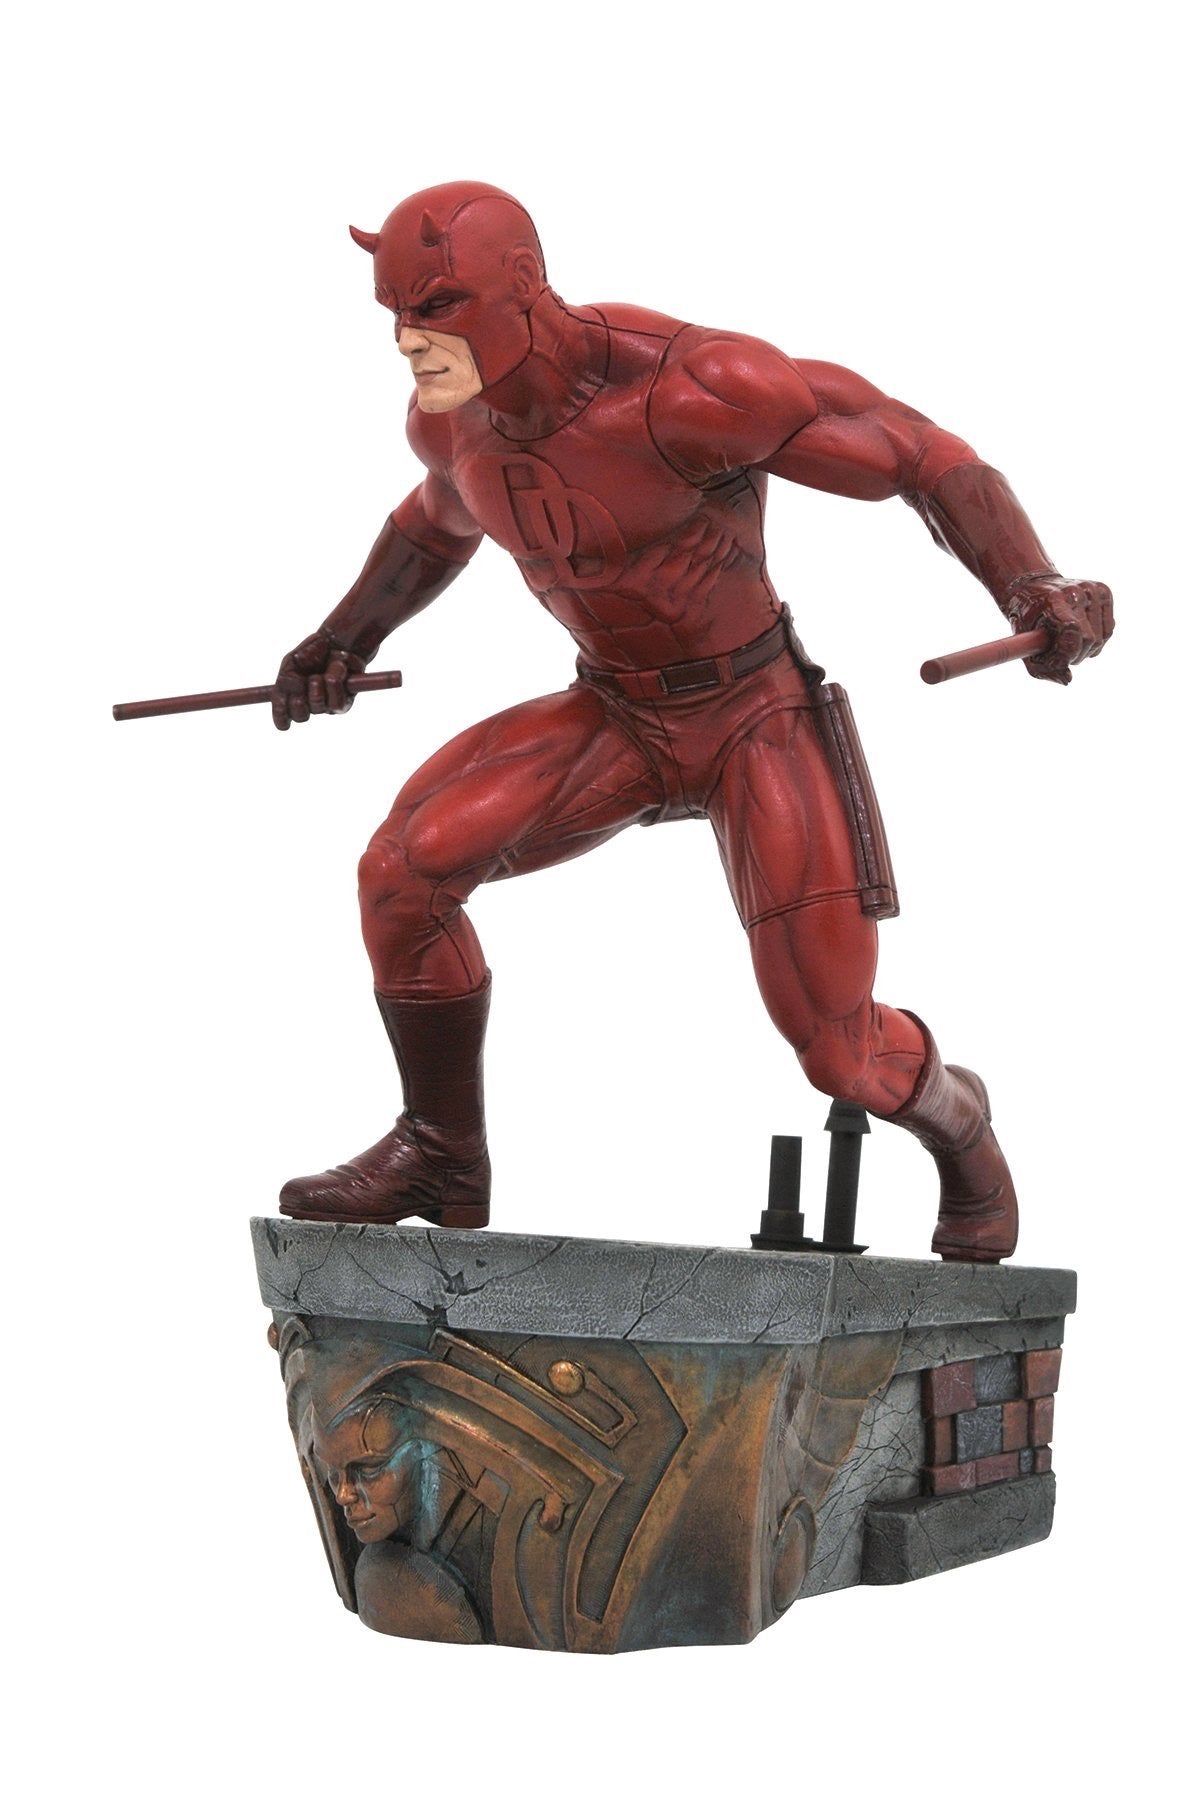 Marvel Premier Collection Daredevil 12-Inch Resin Statue - Statue - The Hooded Goblin